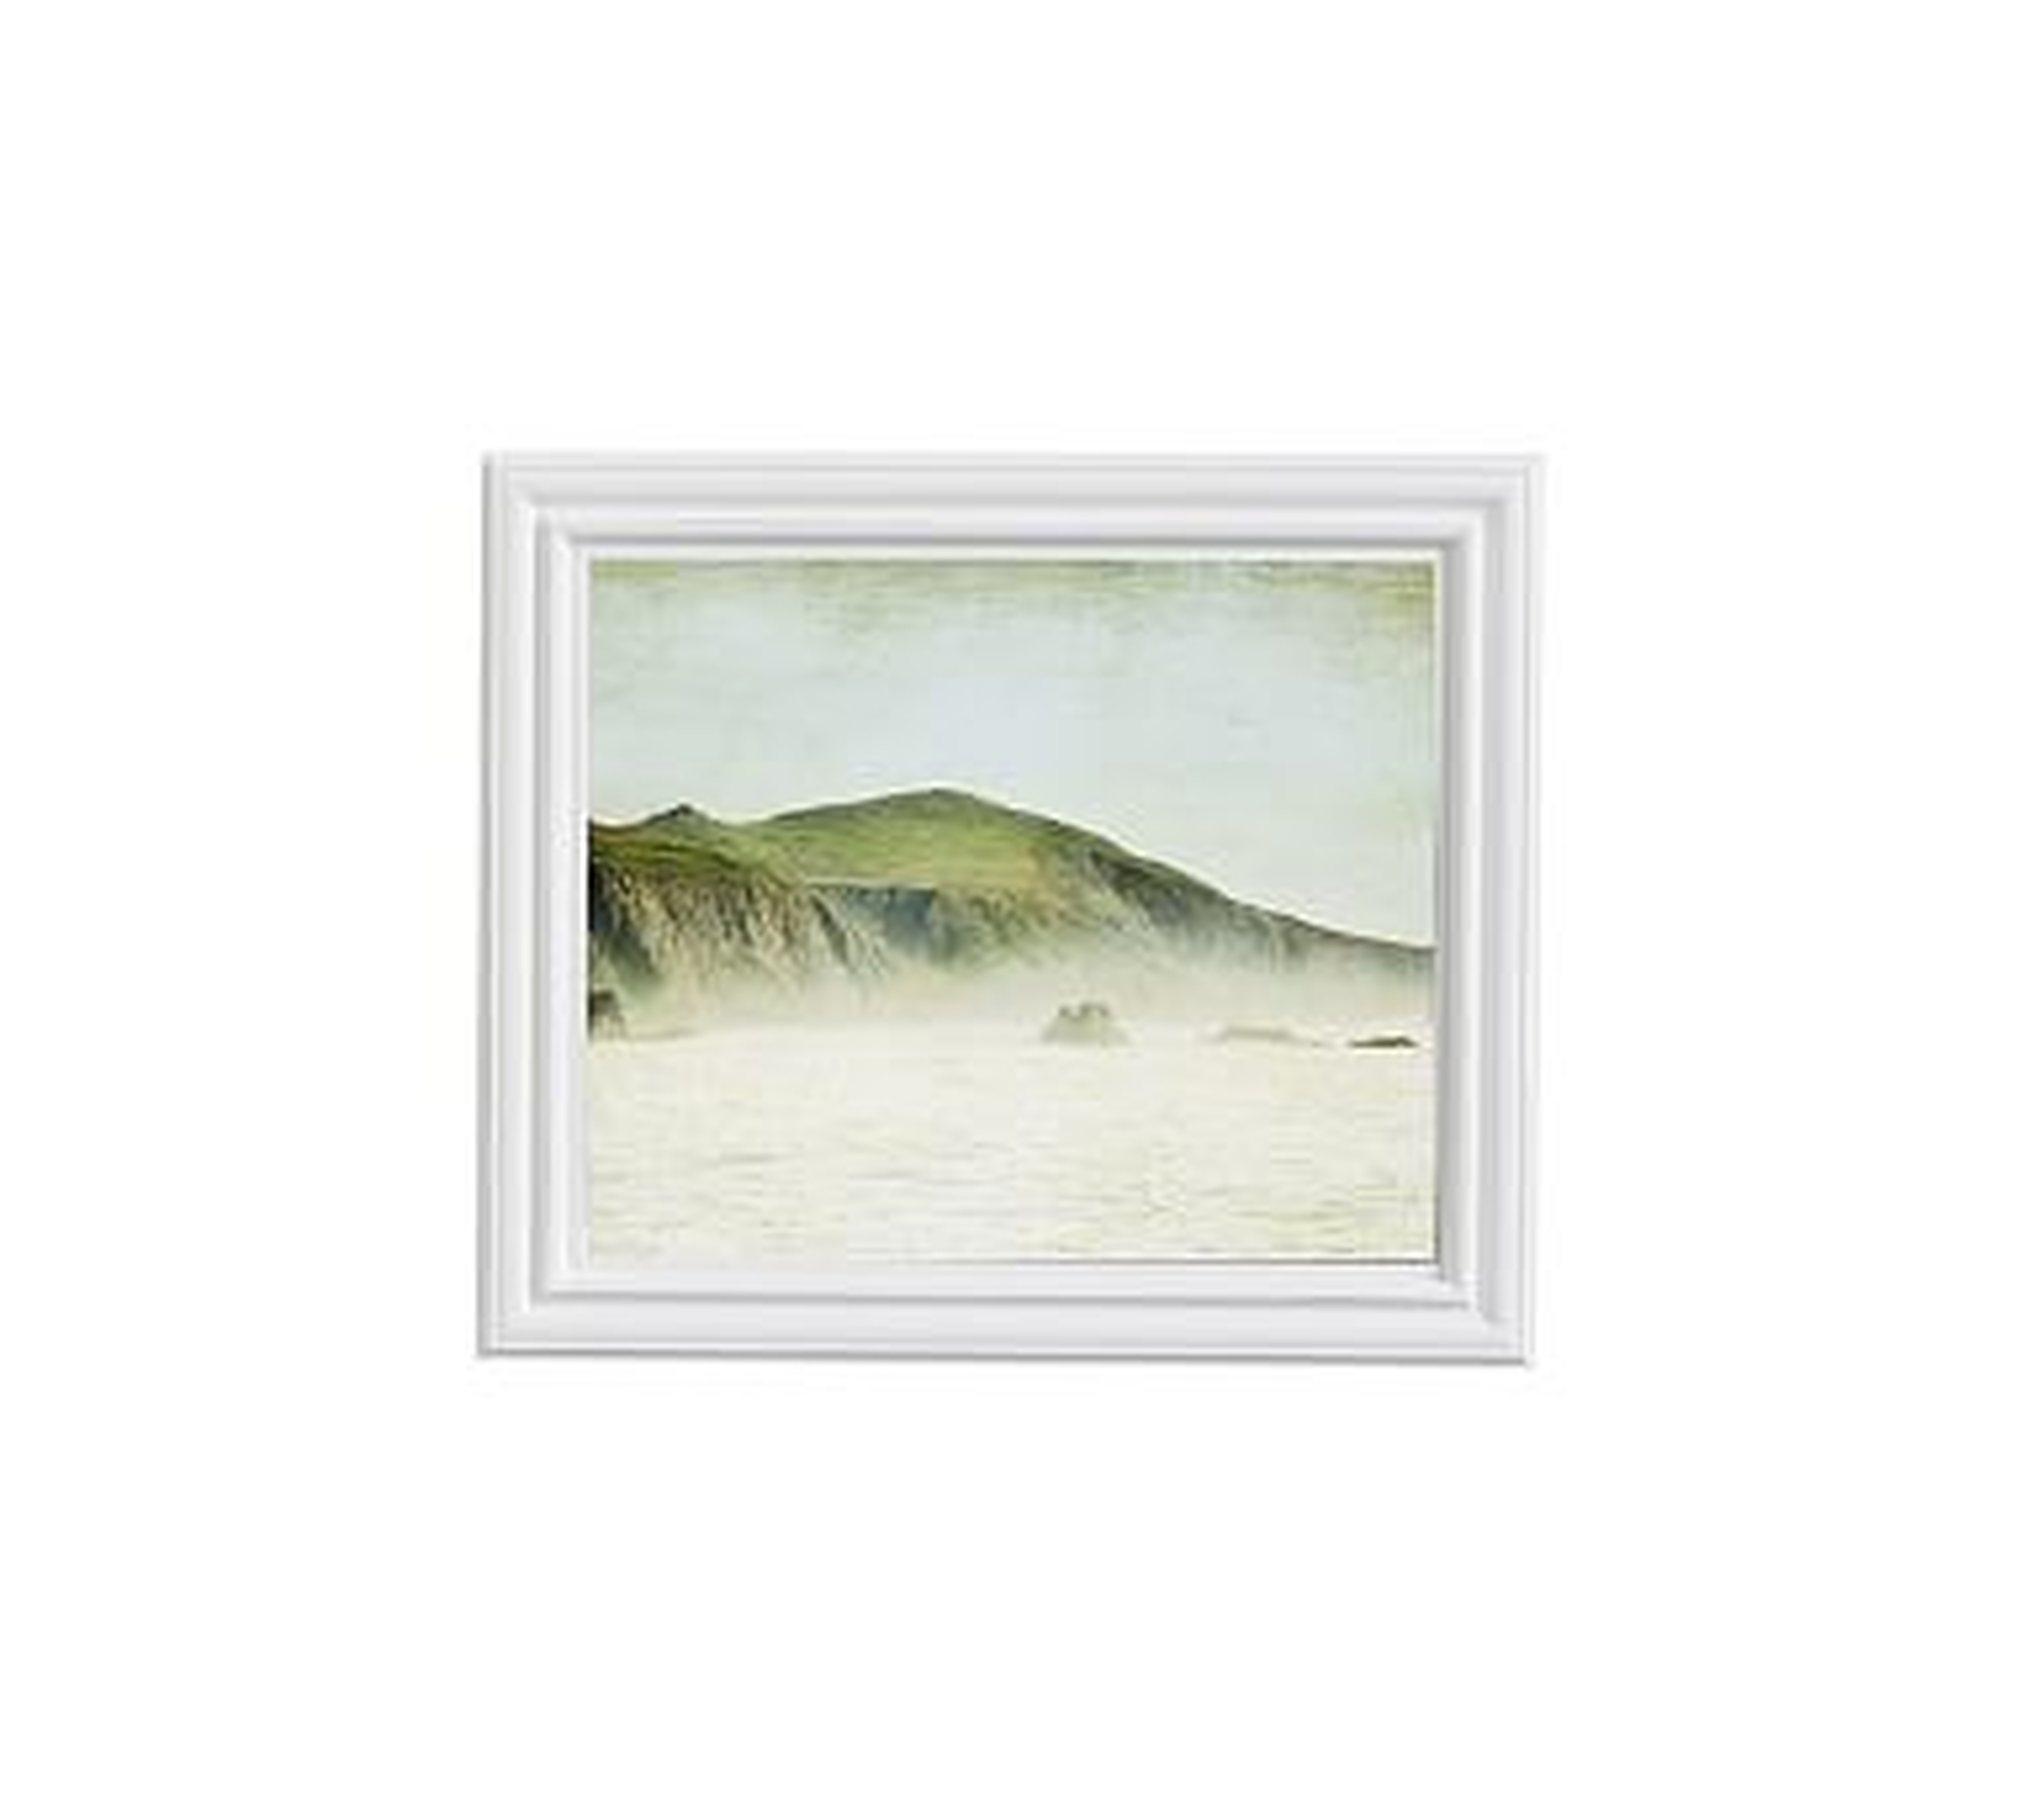 Green and Mist Framed Print by Lupen Grainne, 13 x 11", Ridged Distressed Frame, White, No Mat - Pottery Barn